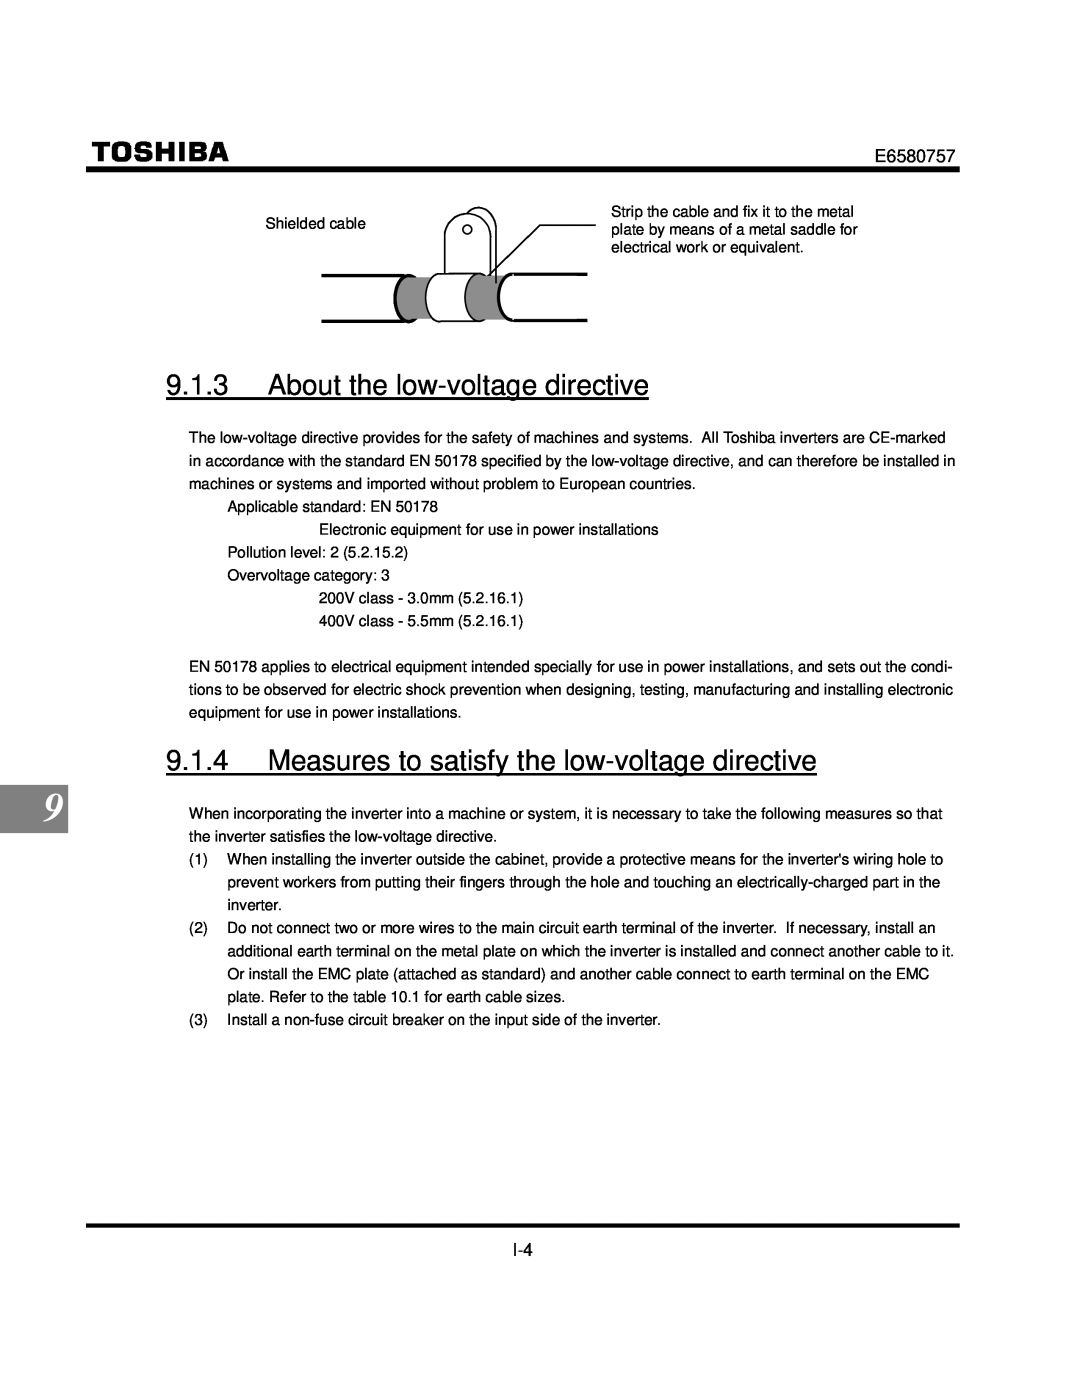 Toshiba VF-S9 manual About the low-voltage directive, 9.1.4, Measures to satisfy the low-voltage directive 